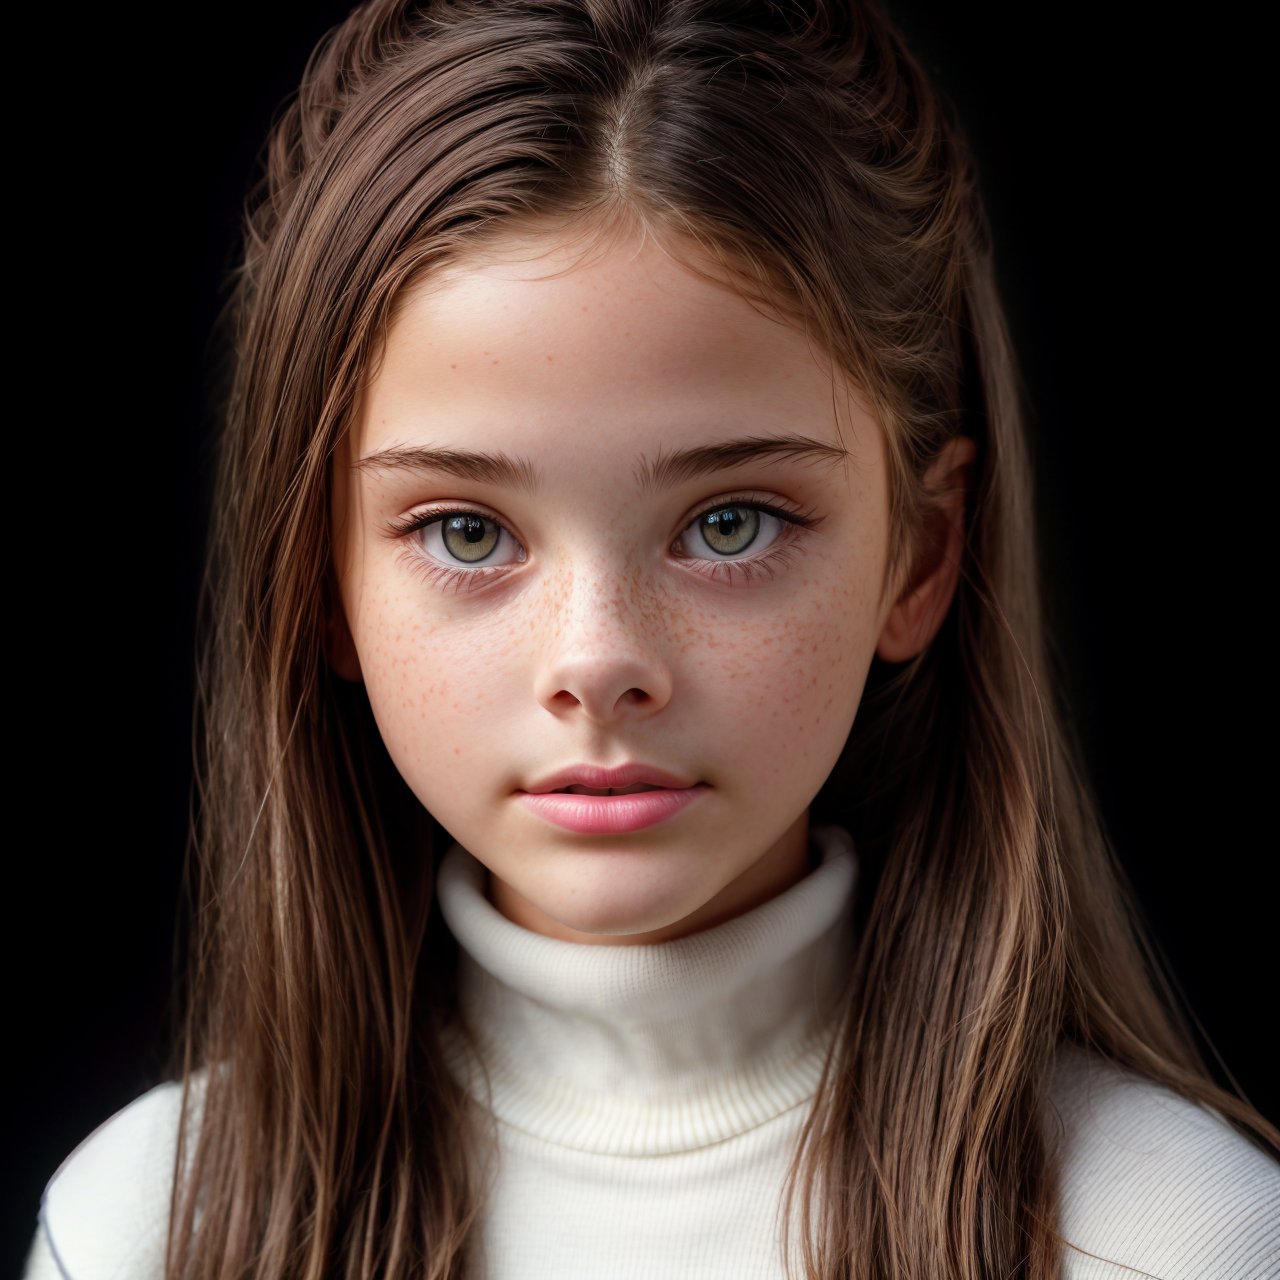 best quality, extra resolution, close up portrait of adorable (AIDA_LoRA_MeW2016:1.1) as cute [little] girl <lora:AIDA_LoRA_MeW2016:0.9> wearing (white turtle neck sweater:1.1), with glossy skin with visible pores and freckles, pretty face, naughty, playful, intimate, flirting, cinematic, studio photo, kkw-ph1, (colorful:1.1), (charcoal smoky black background:1.1)